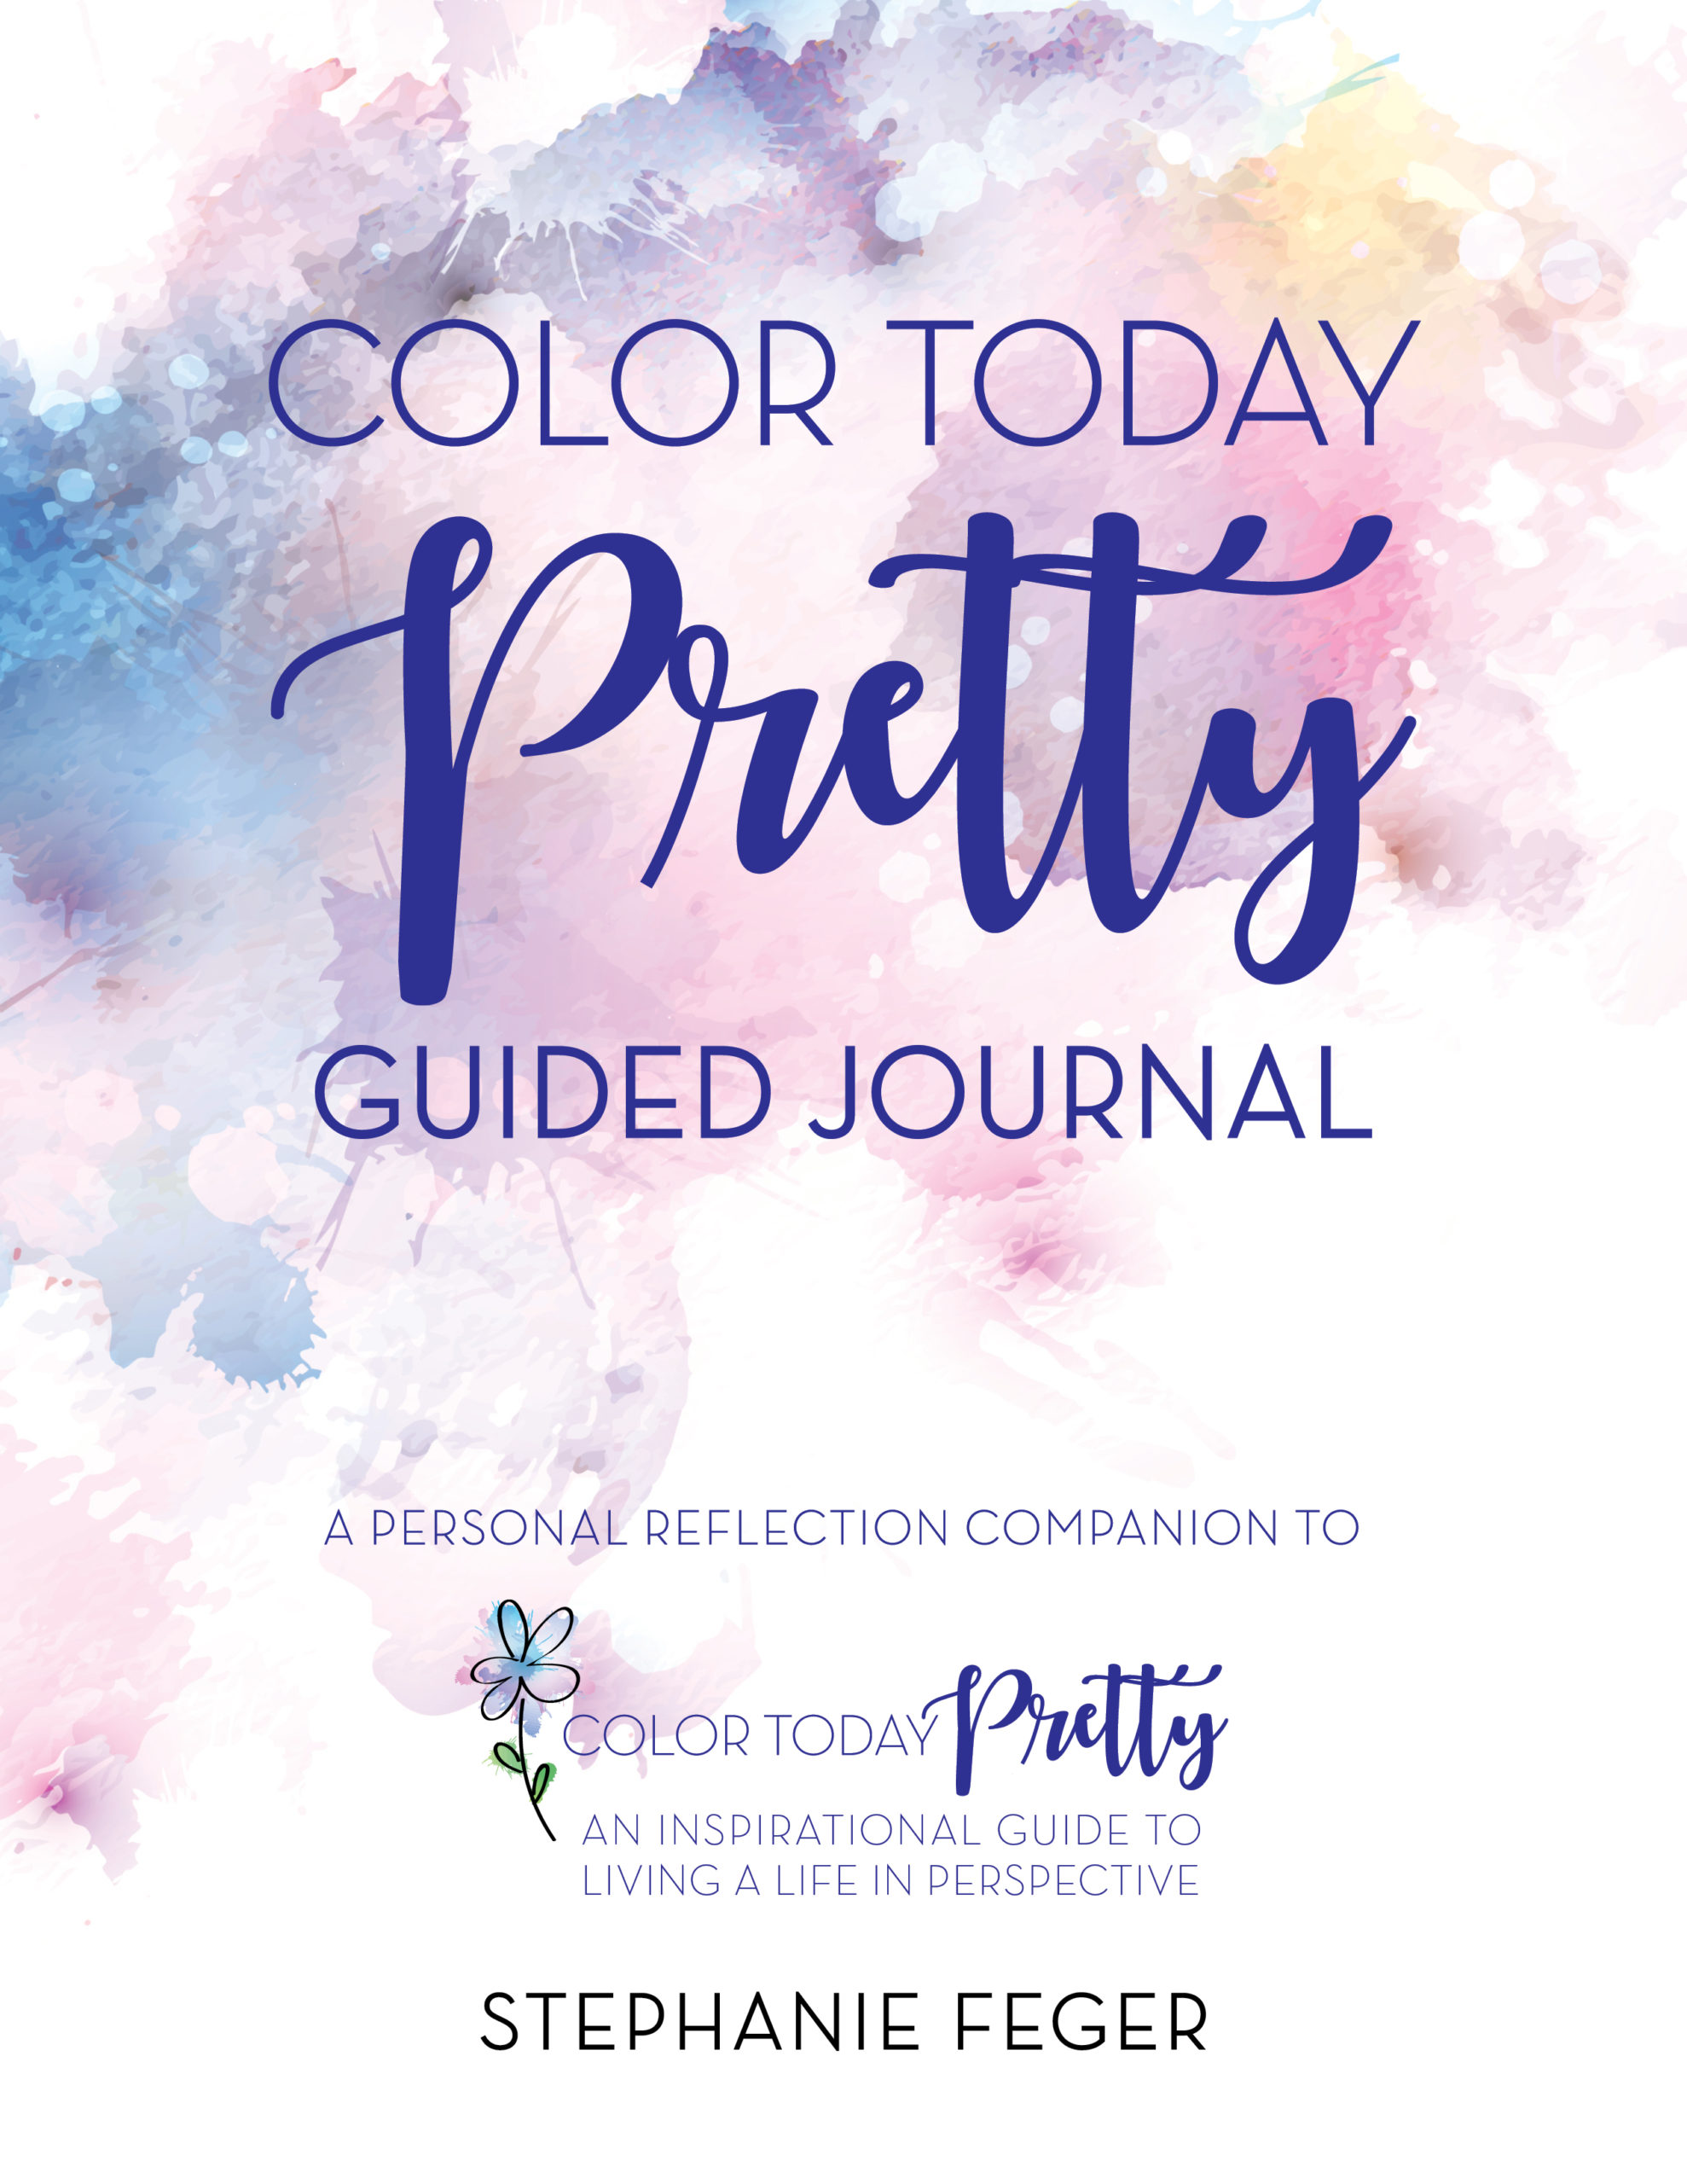 Color Today Pretty Guided Journal Cover-Comp4